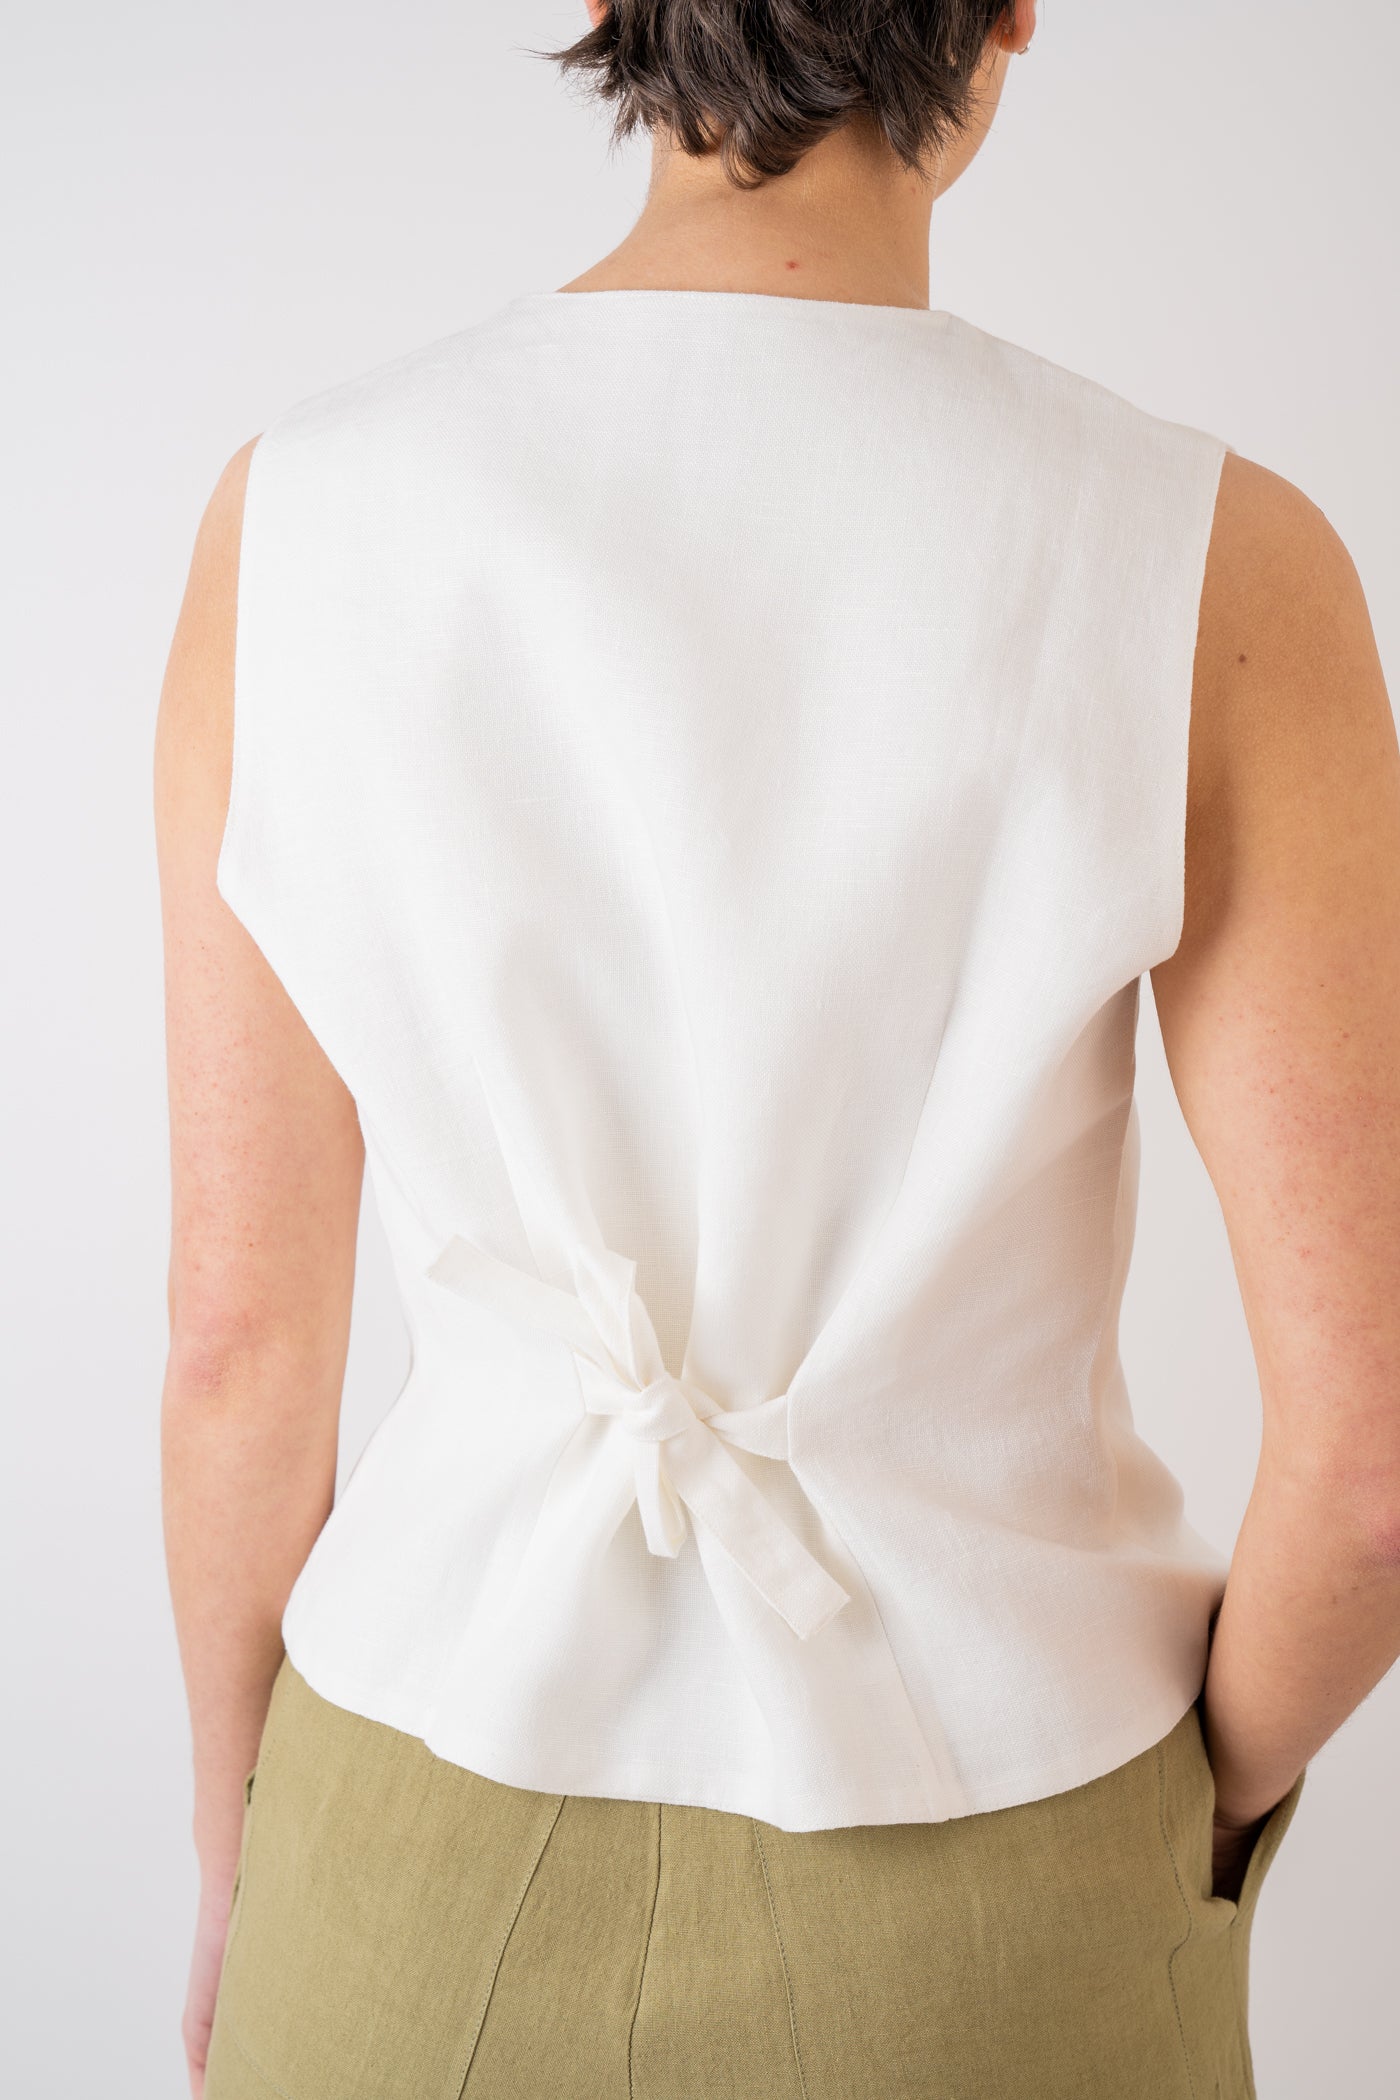 Xi Atelier Linen Avery Waistcoat in white with adjustable tie at the back